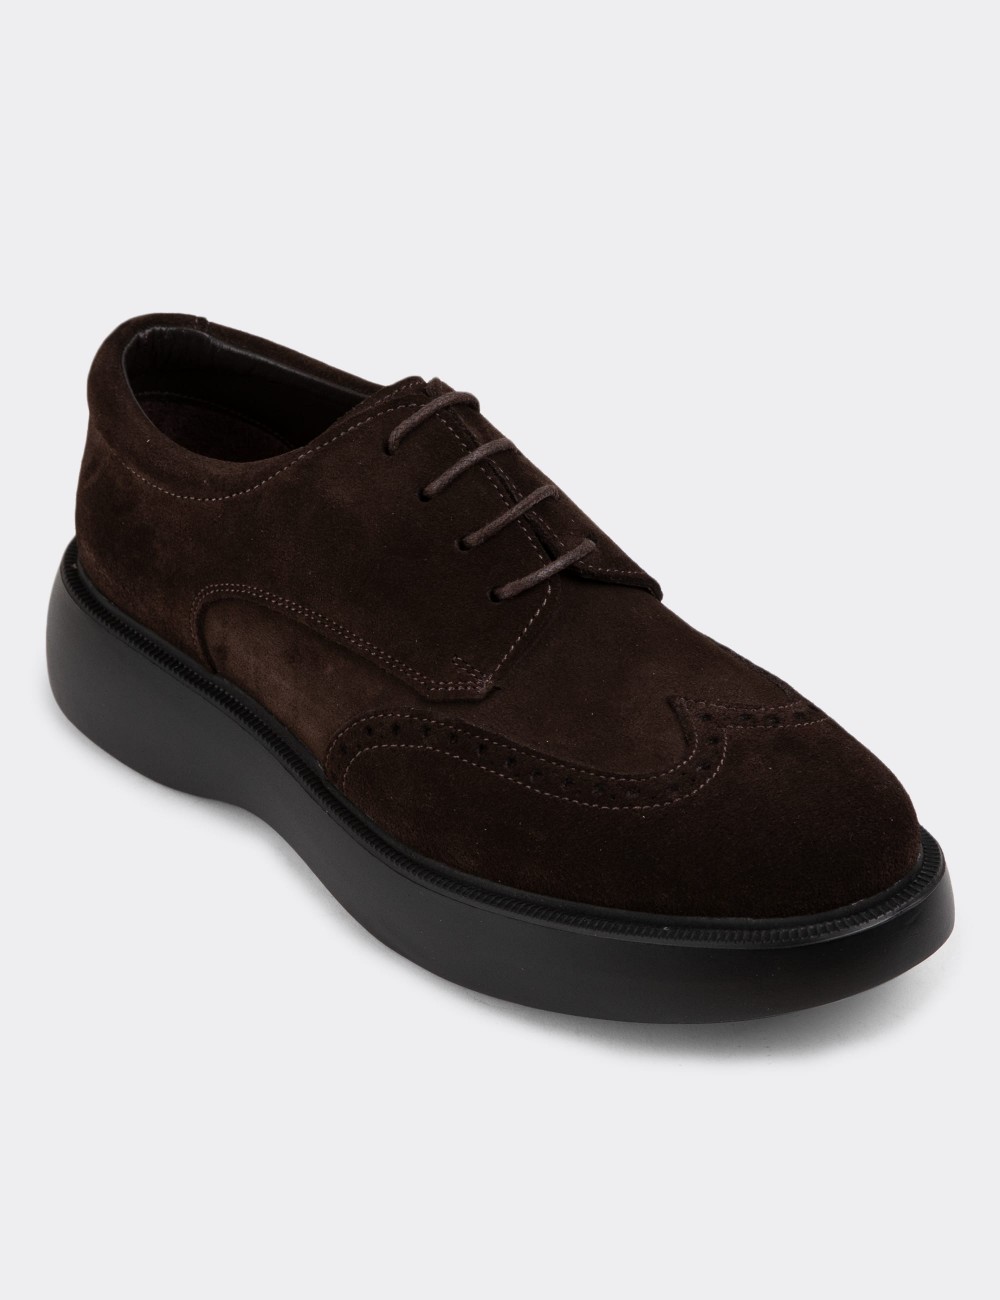 Brown Suede Leather Lace-up Shoes - 01942MKHVE02